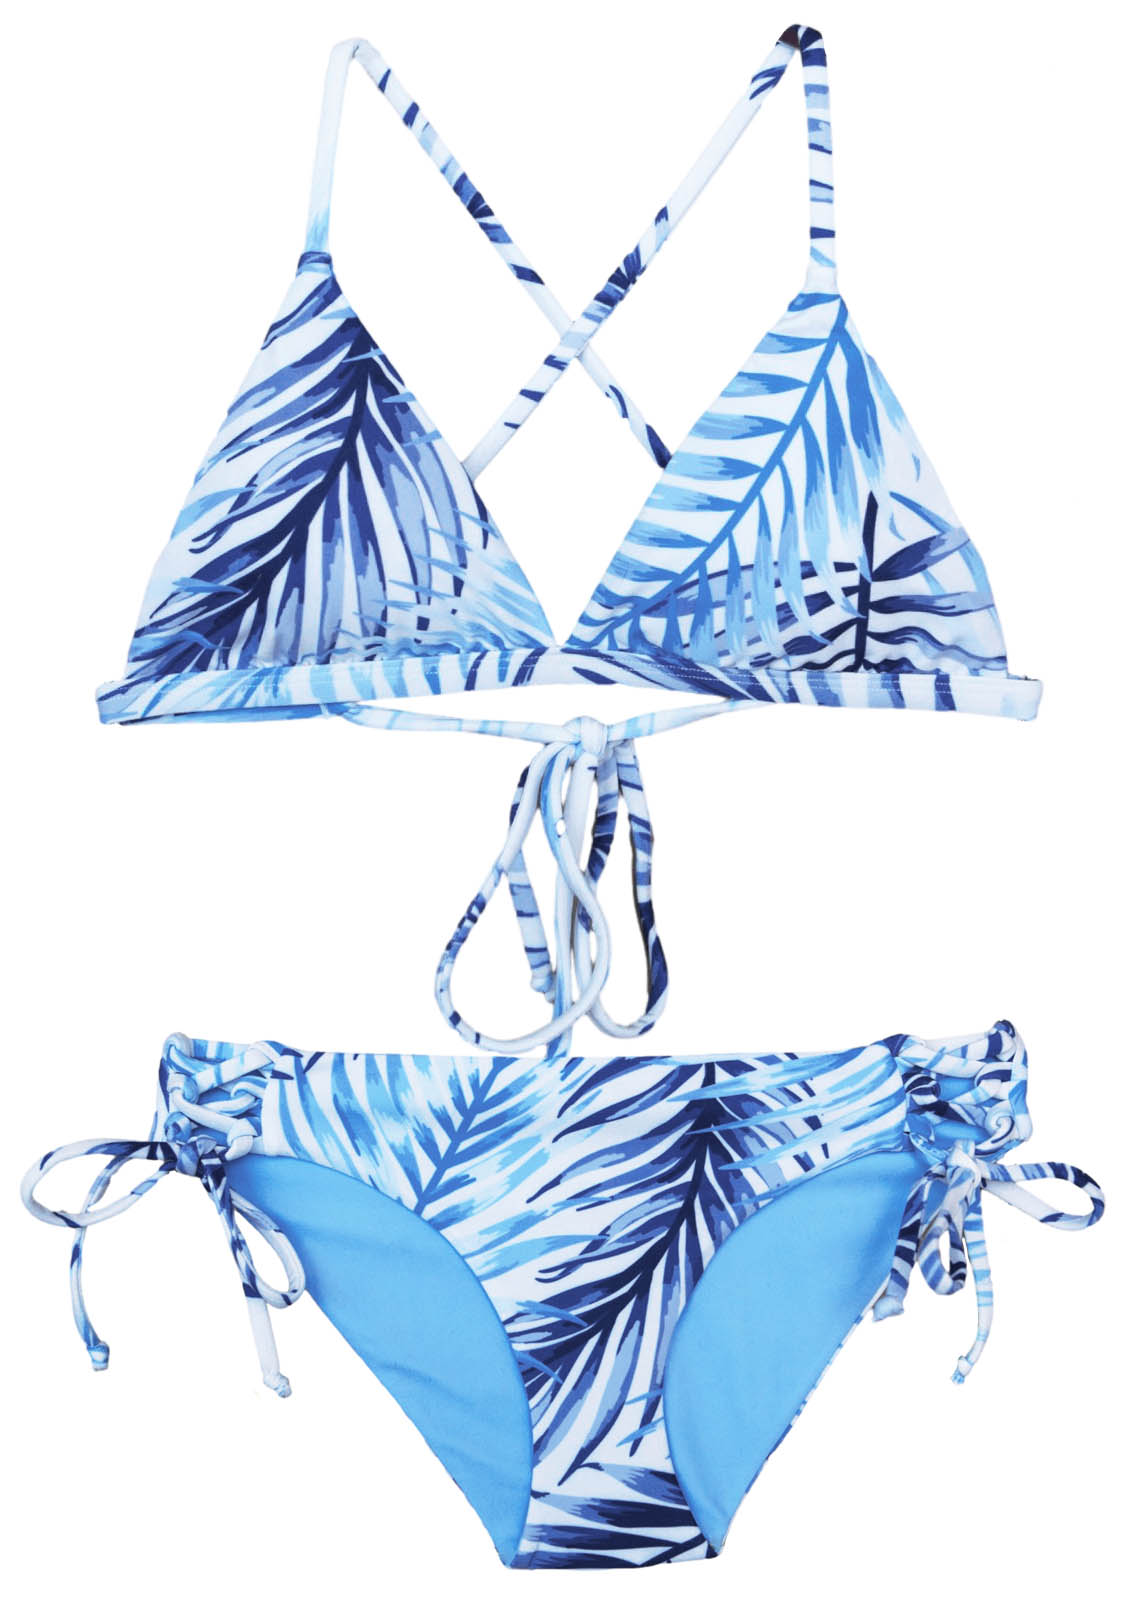 A Blue and white Chance Loves Bikini with a padded Triangle top and Full coverage bottoms with side ties